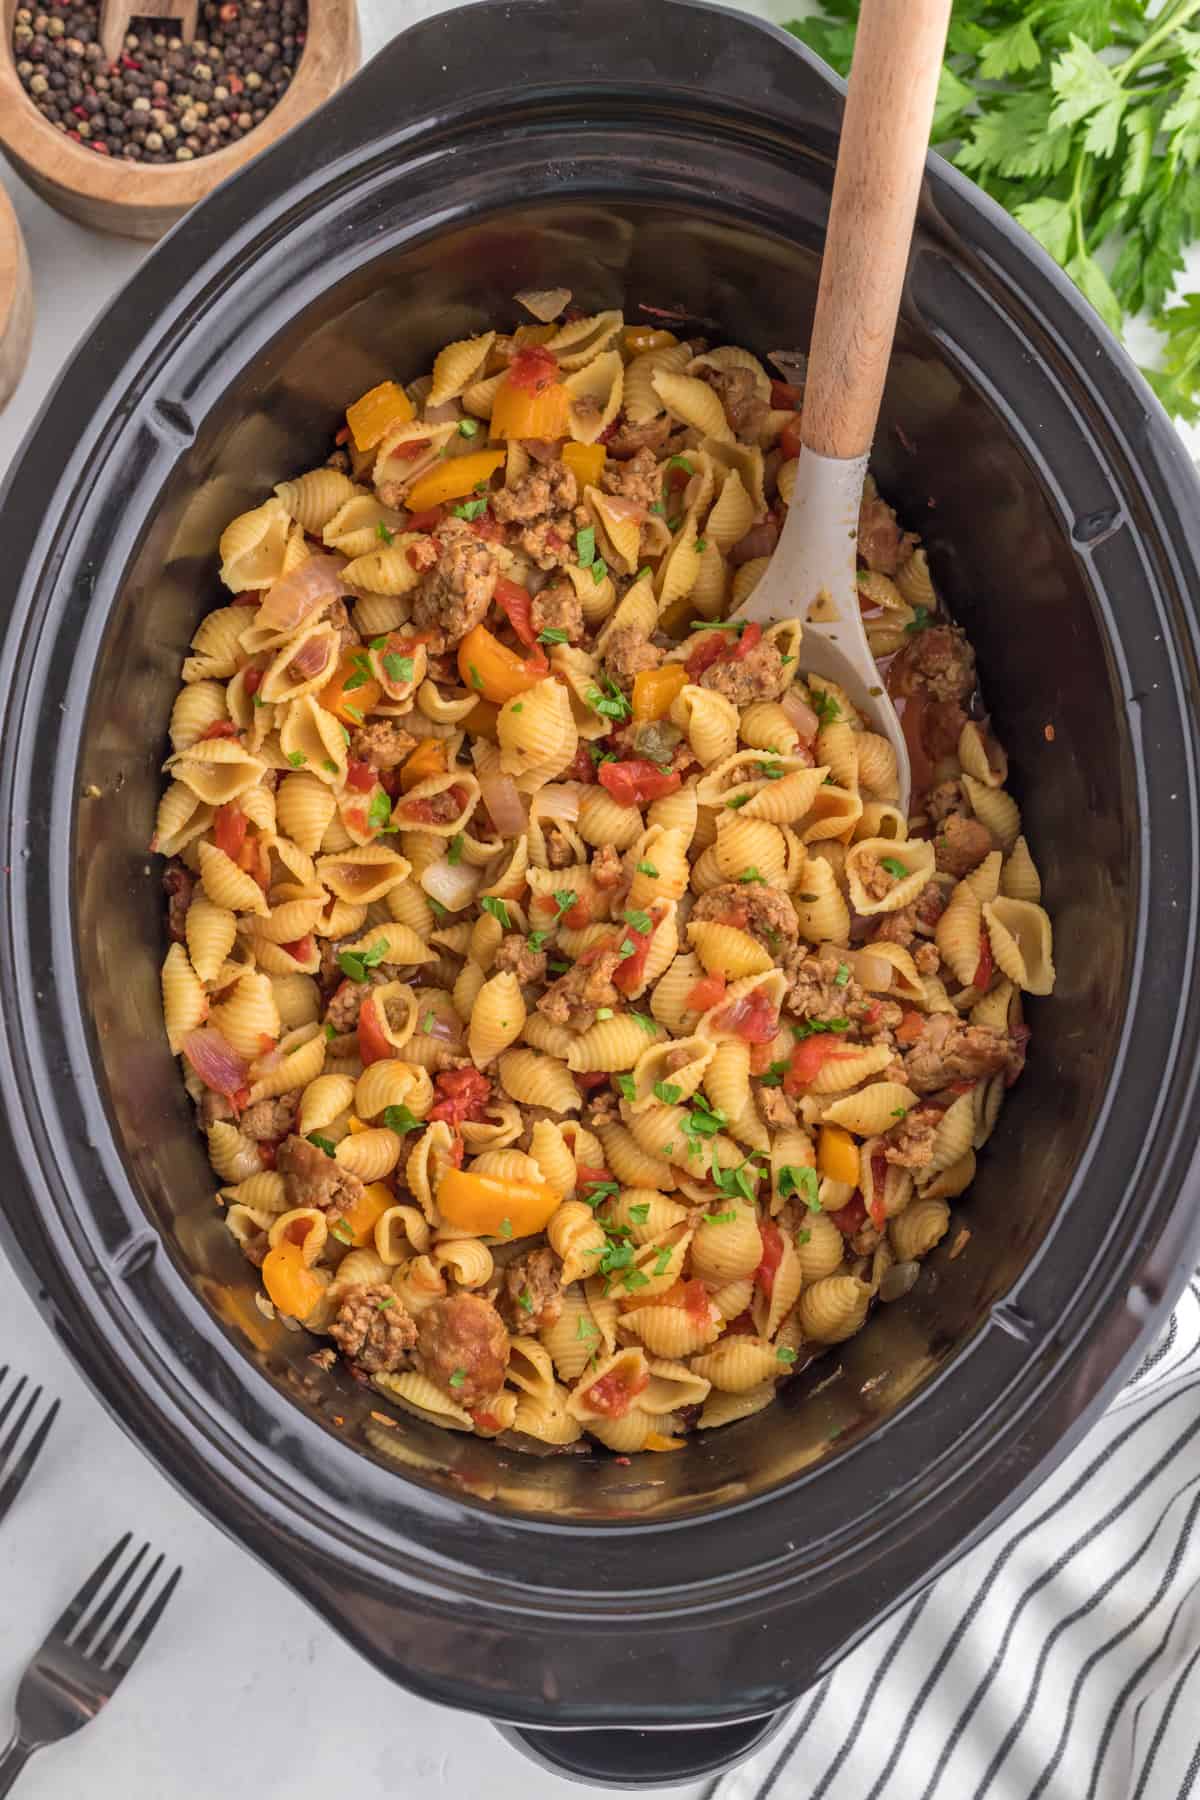 Ground Pork Slow Cooker Casserole still in the slow cooker with a serving spoon.